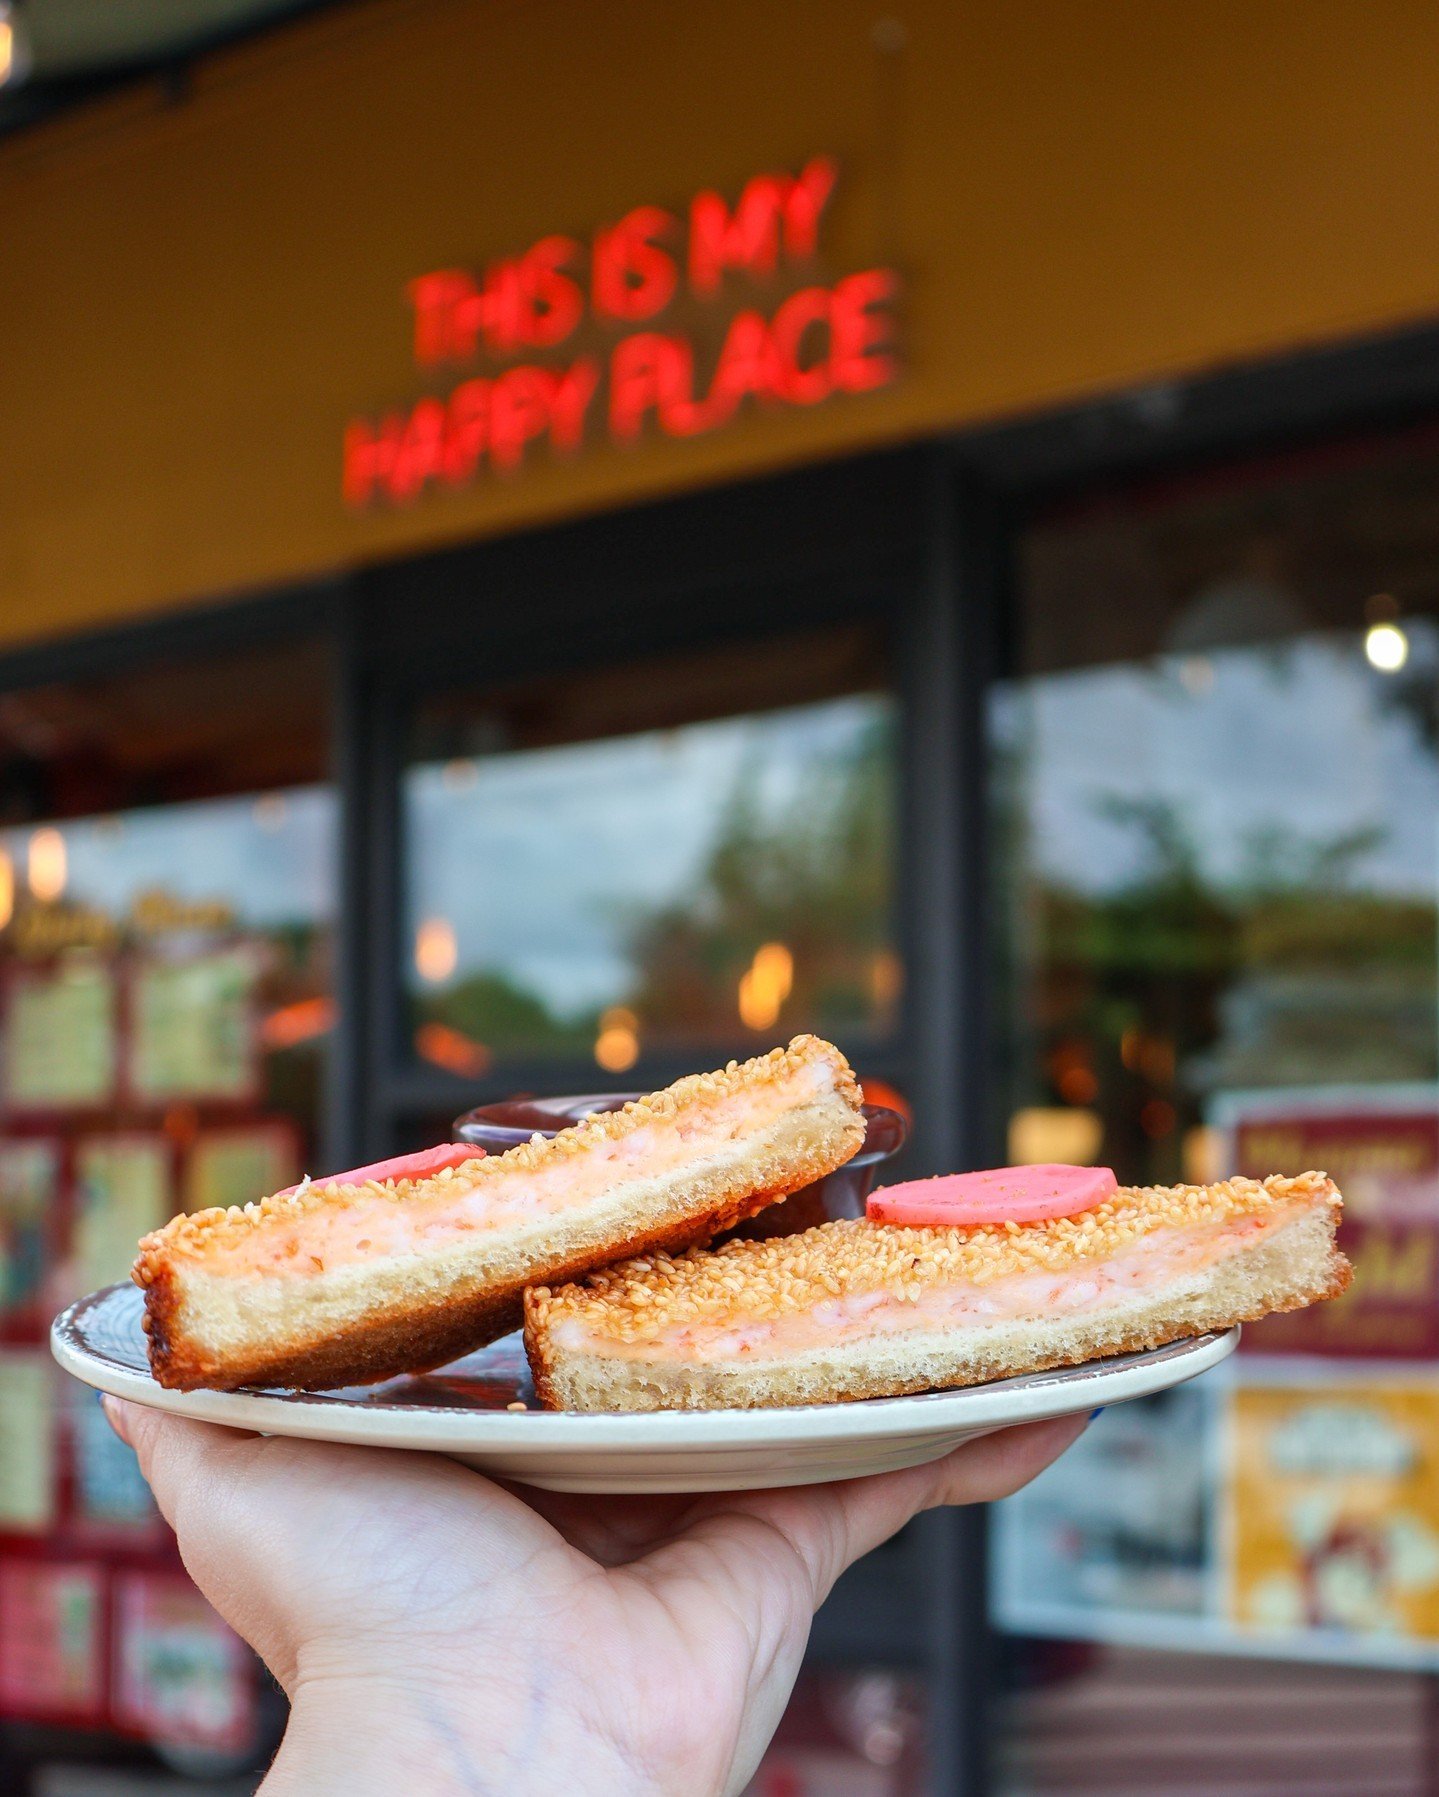 the happiest of hours at our happy place ✨ $5 shrimpy toast during happy hour, every weekday from 3 - 6 pm! #trananmiami